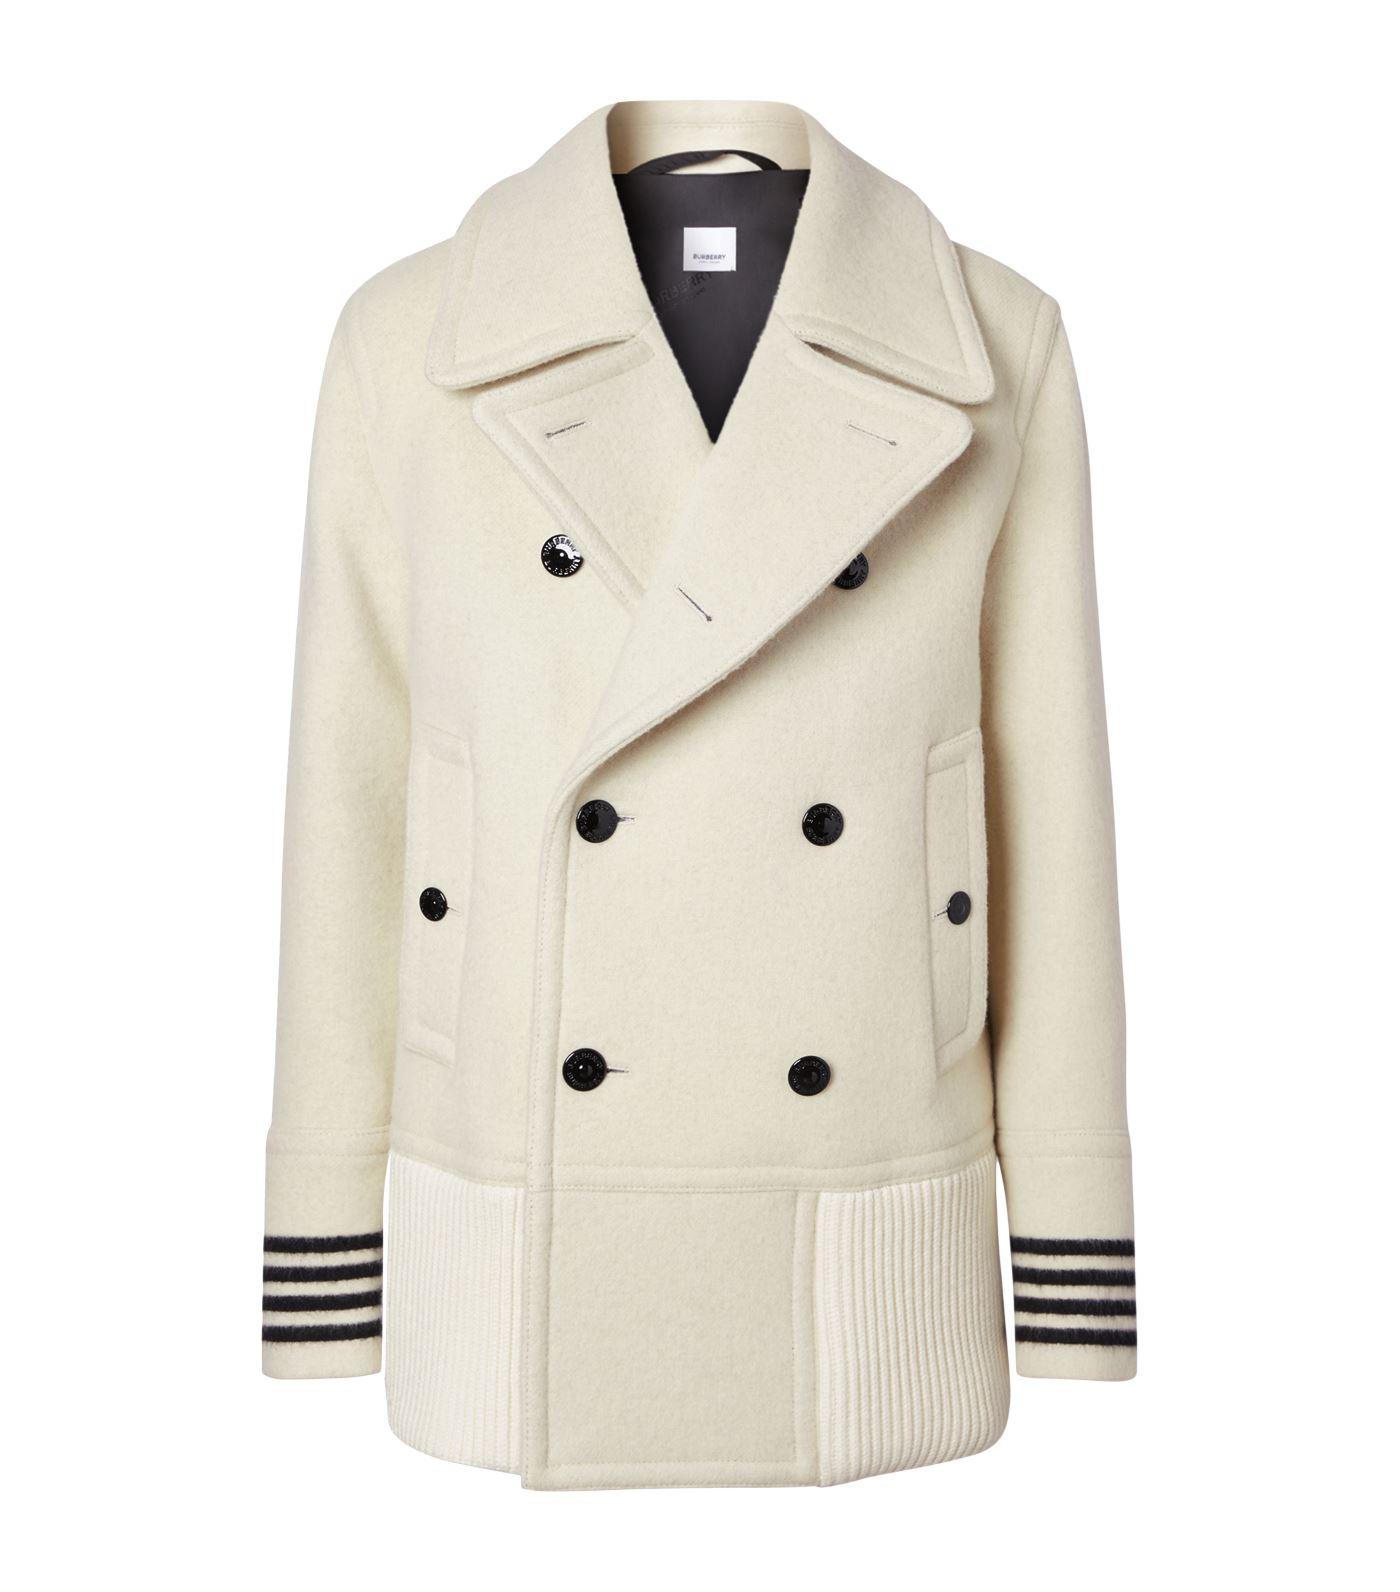 Burberry Wool Striped Cuff Pea Coat in White for Men - Lyst